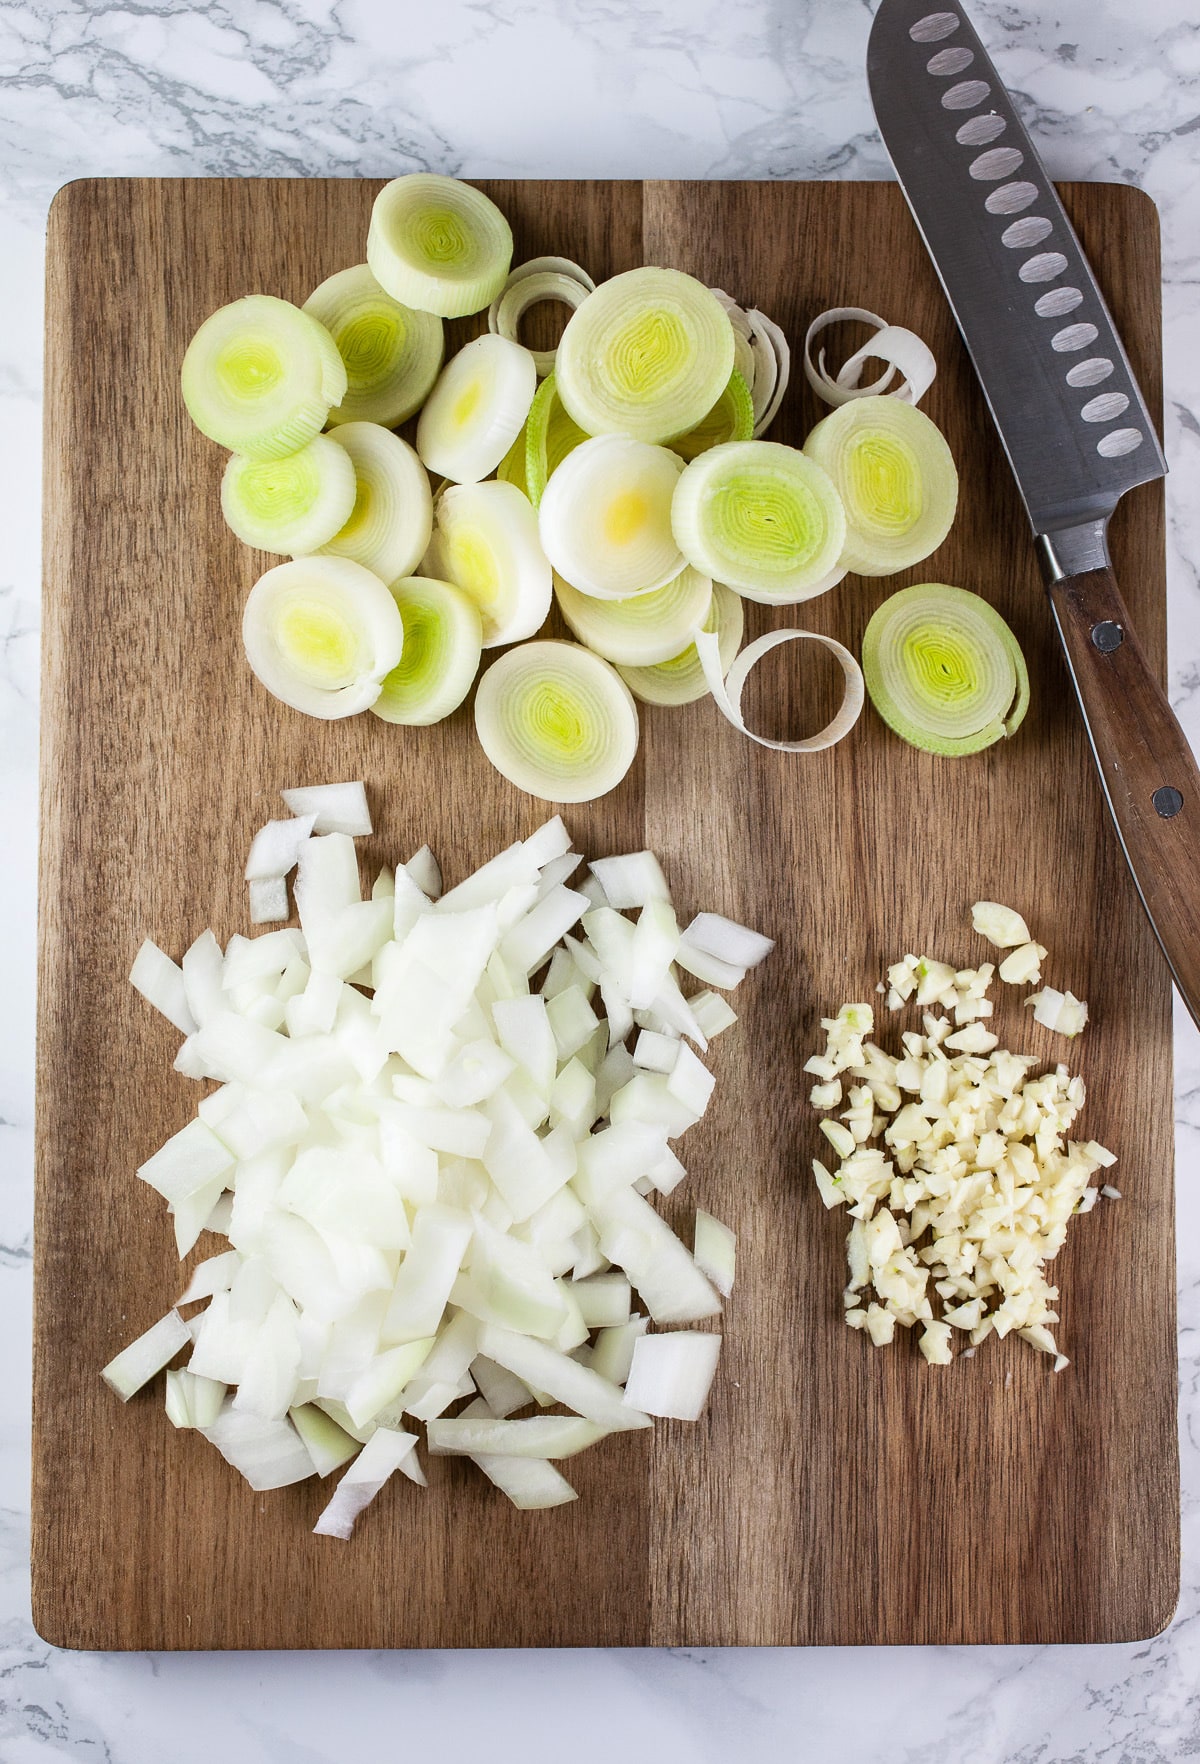 Minced garlic, onions, and sliced leeks on wooden cutting board with knife.